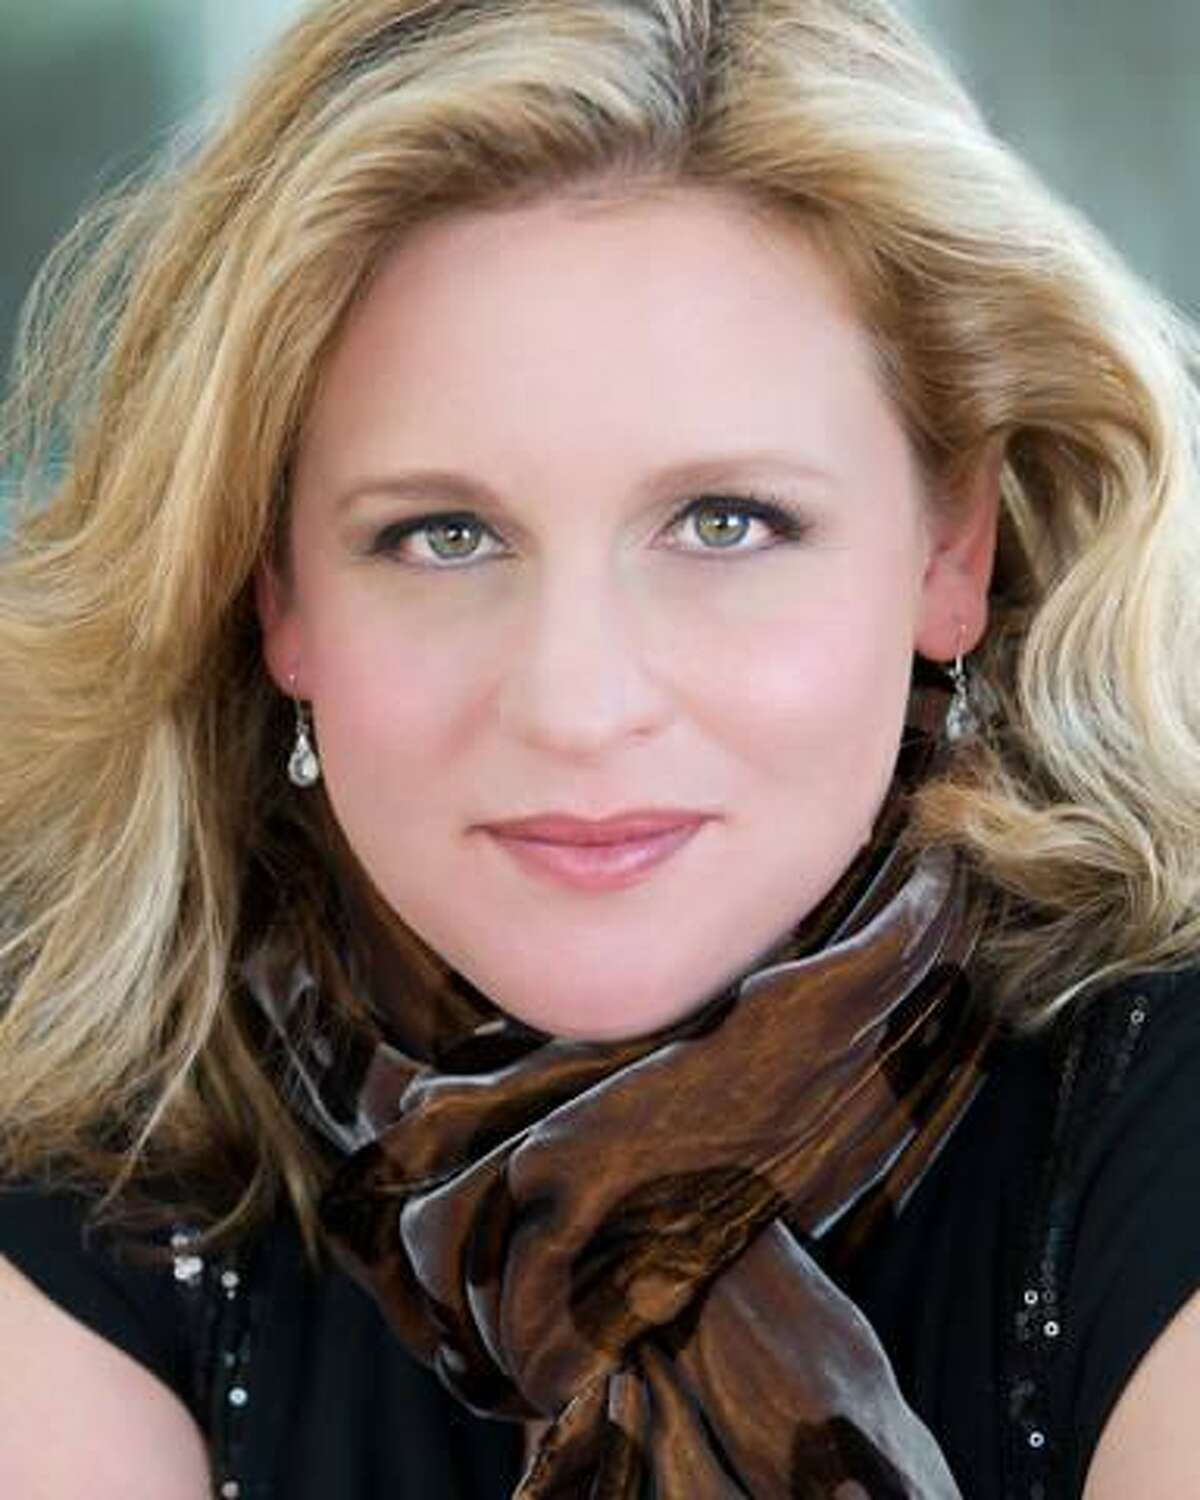 Award-winning mezzo-soprano Holly Sorensen, who grew up in Greenwich, will return to her alma mater as a soloist for an all-Beethoven program celebrating the composer’s 250th birthday. The concert will be at 4 p.m. Saturday, March 14, at the Greenwich High Performing Arts Center. Tickets are $45 and $38, with special $20 price for students, and can be ordered at www.gcs-ct.org or by calling 203-622-5136.